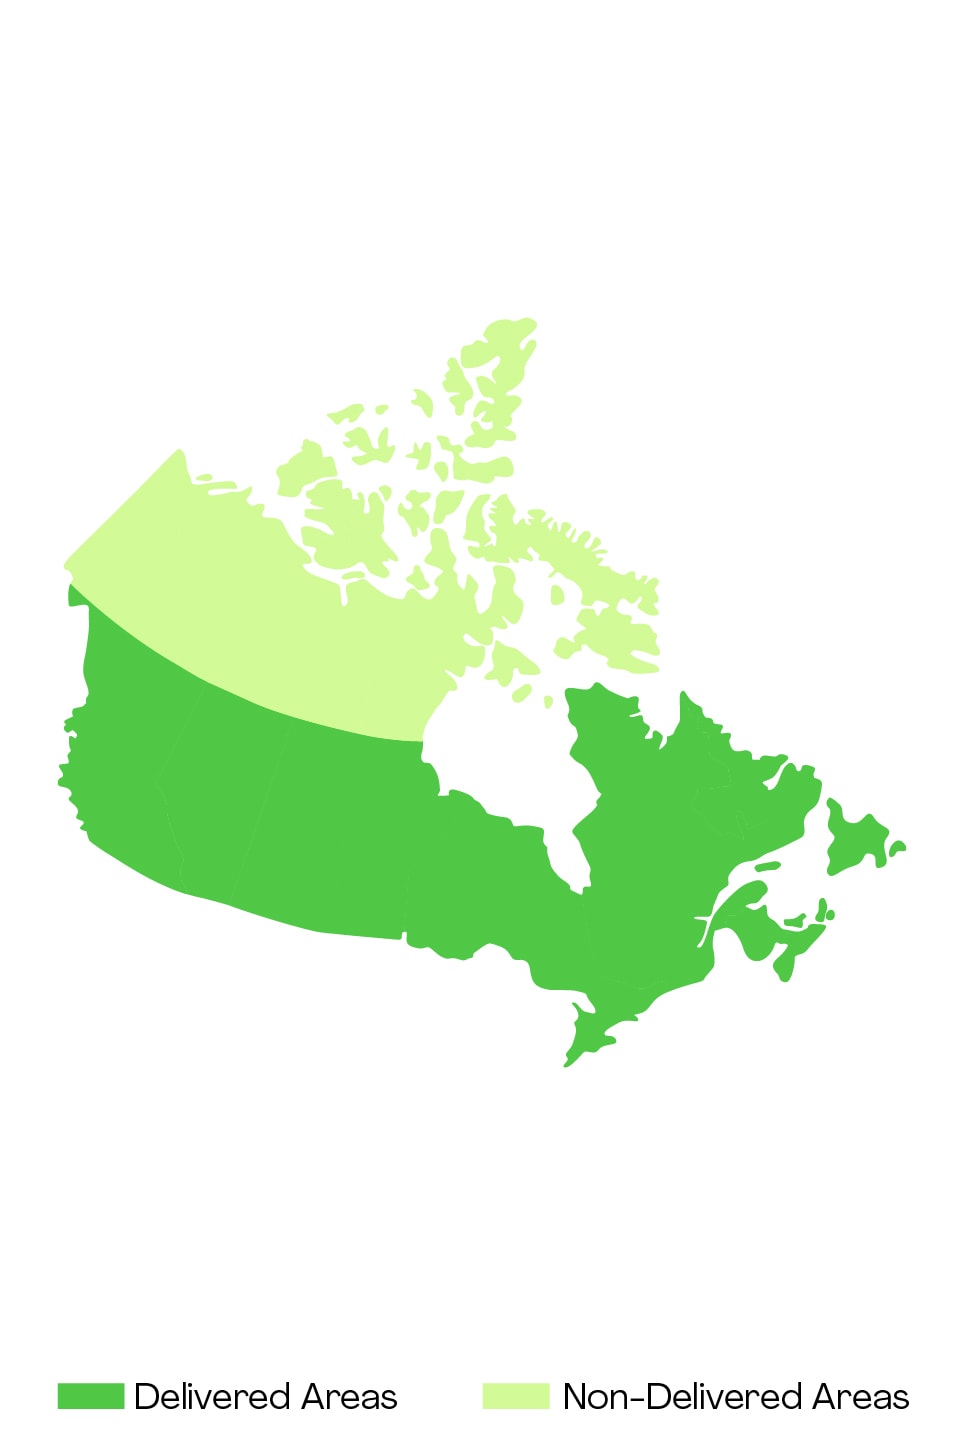 <h2>Meal kits delivery areas in Canada</h2>